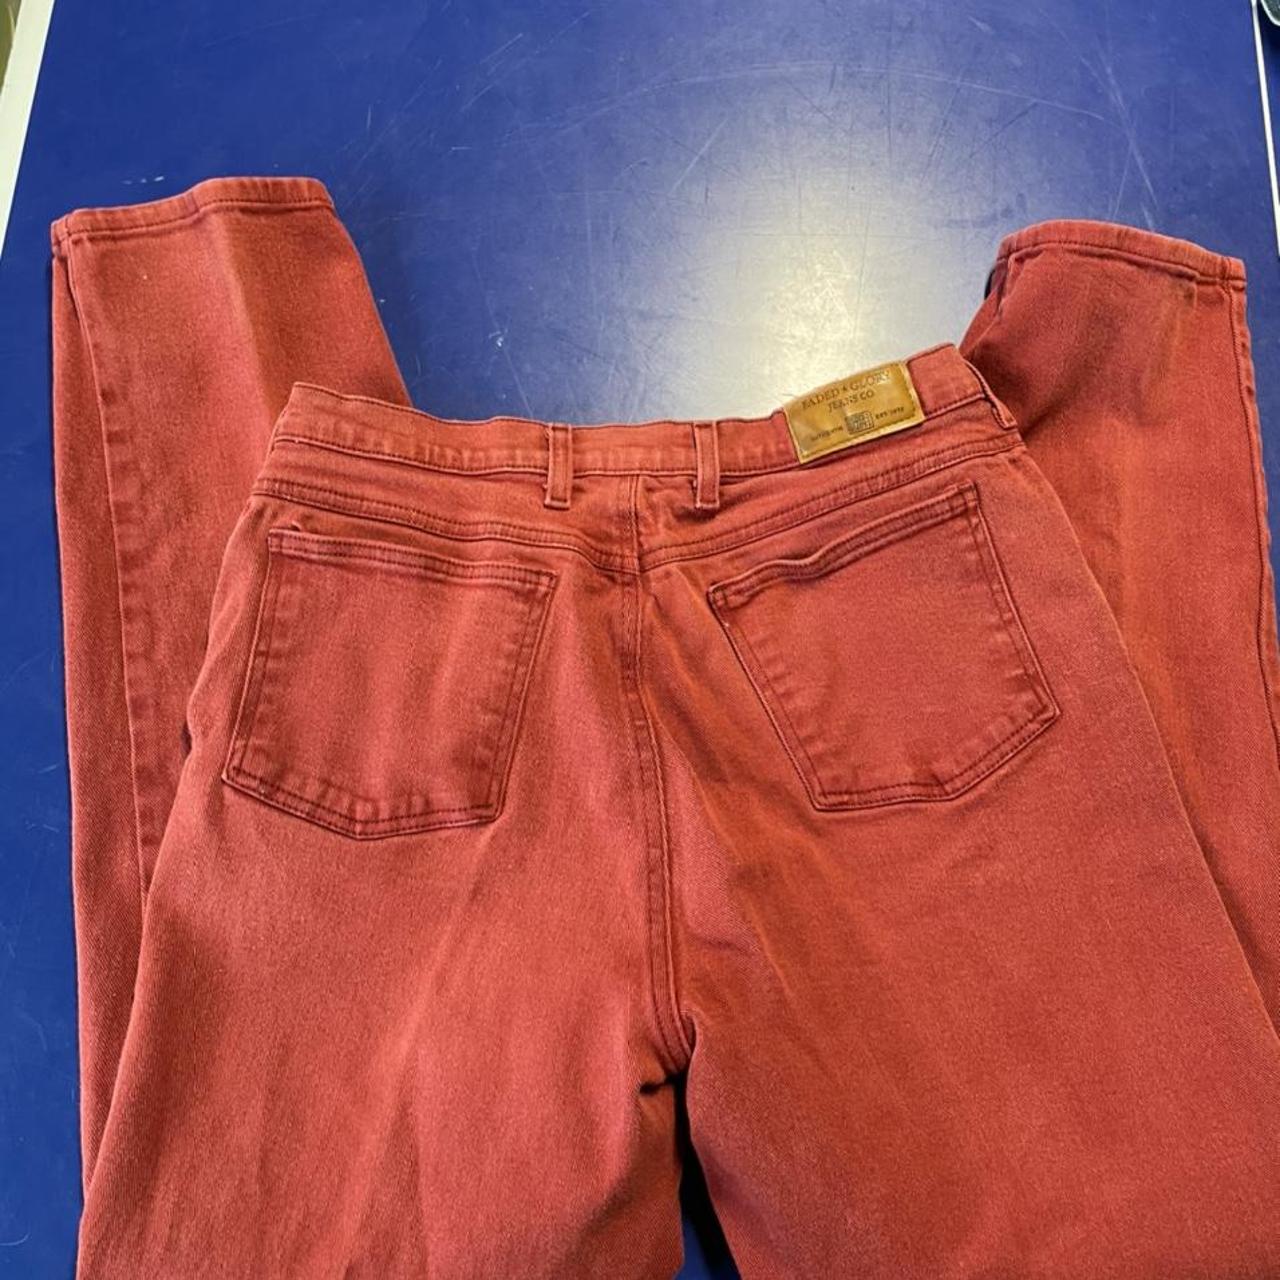 FADED GLORY STRETCH RED JEANS!! Super adorable... - Depop